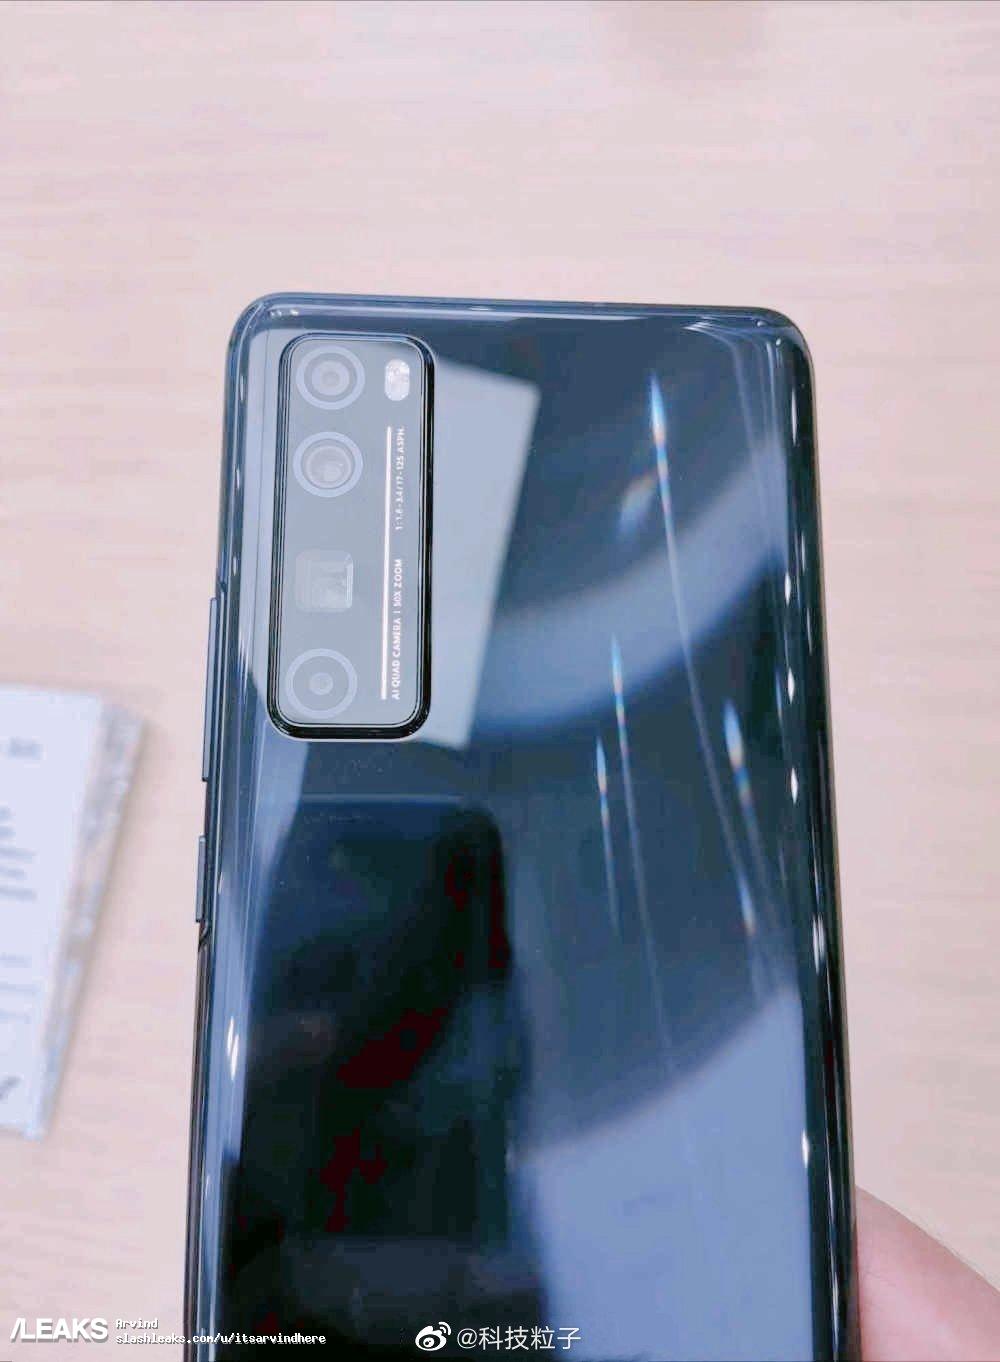 detailed specifications and live photos of huawei nova 7 nova 7 pro and 7 se smartphones were leaked to the network geek tech online